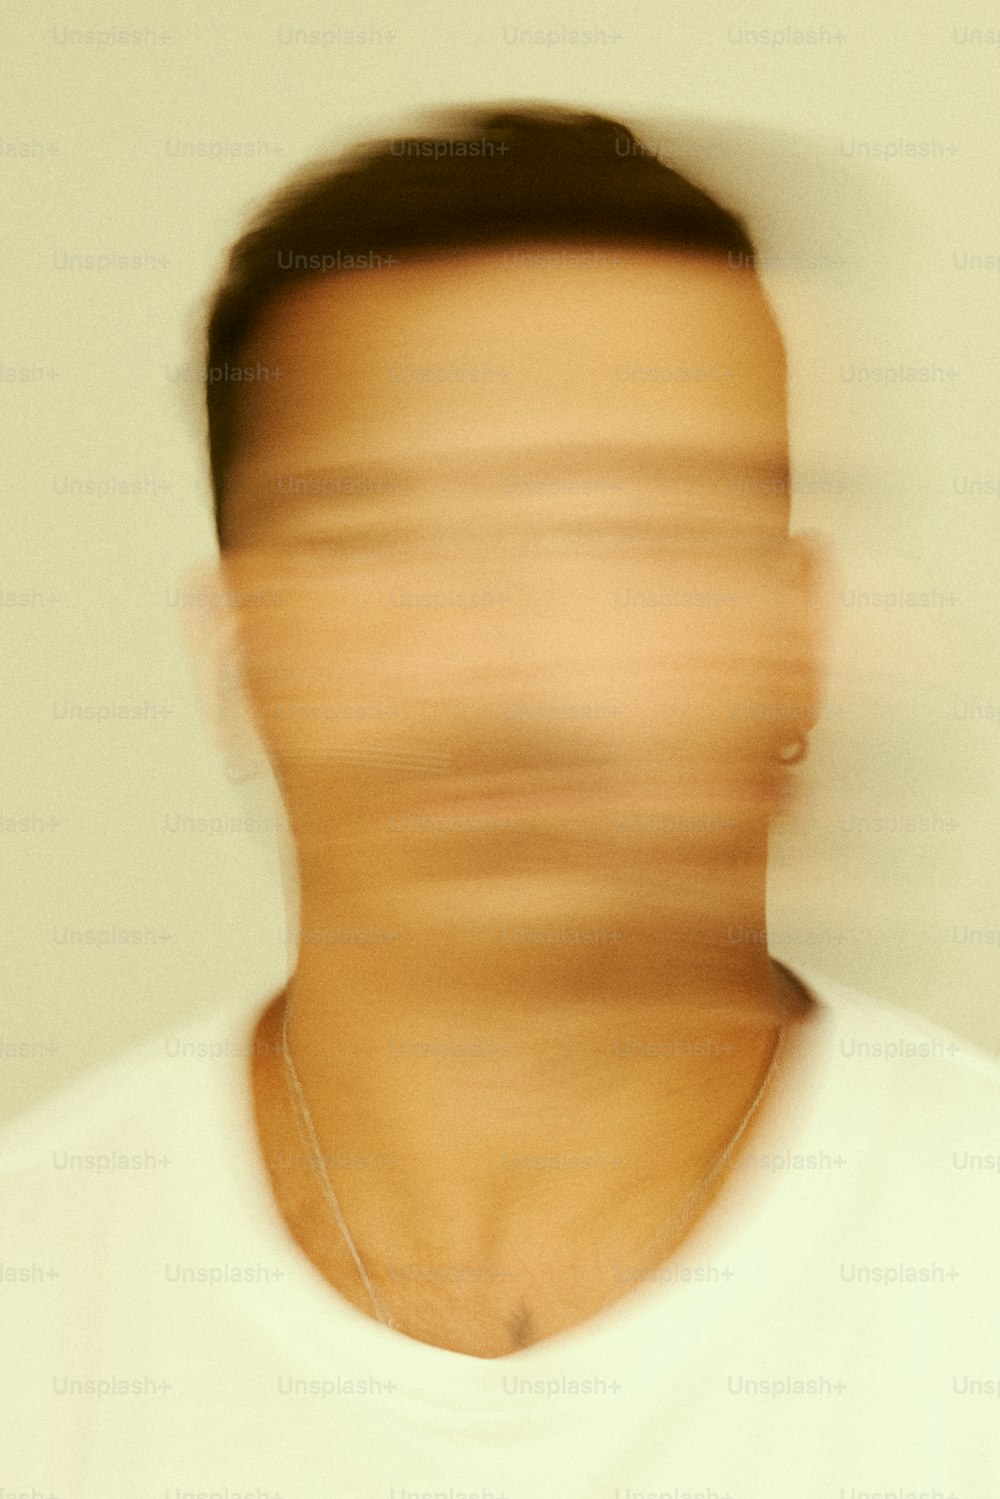 a blurry photo of a man's face